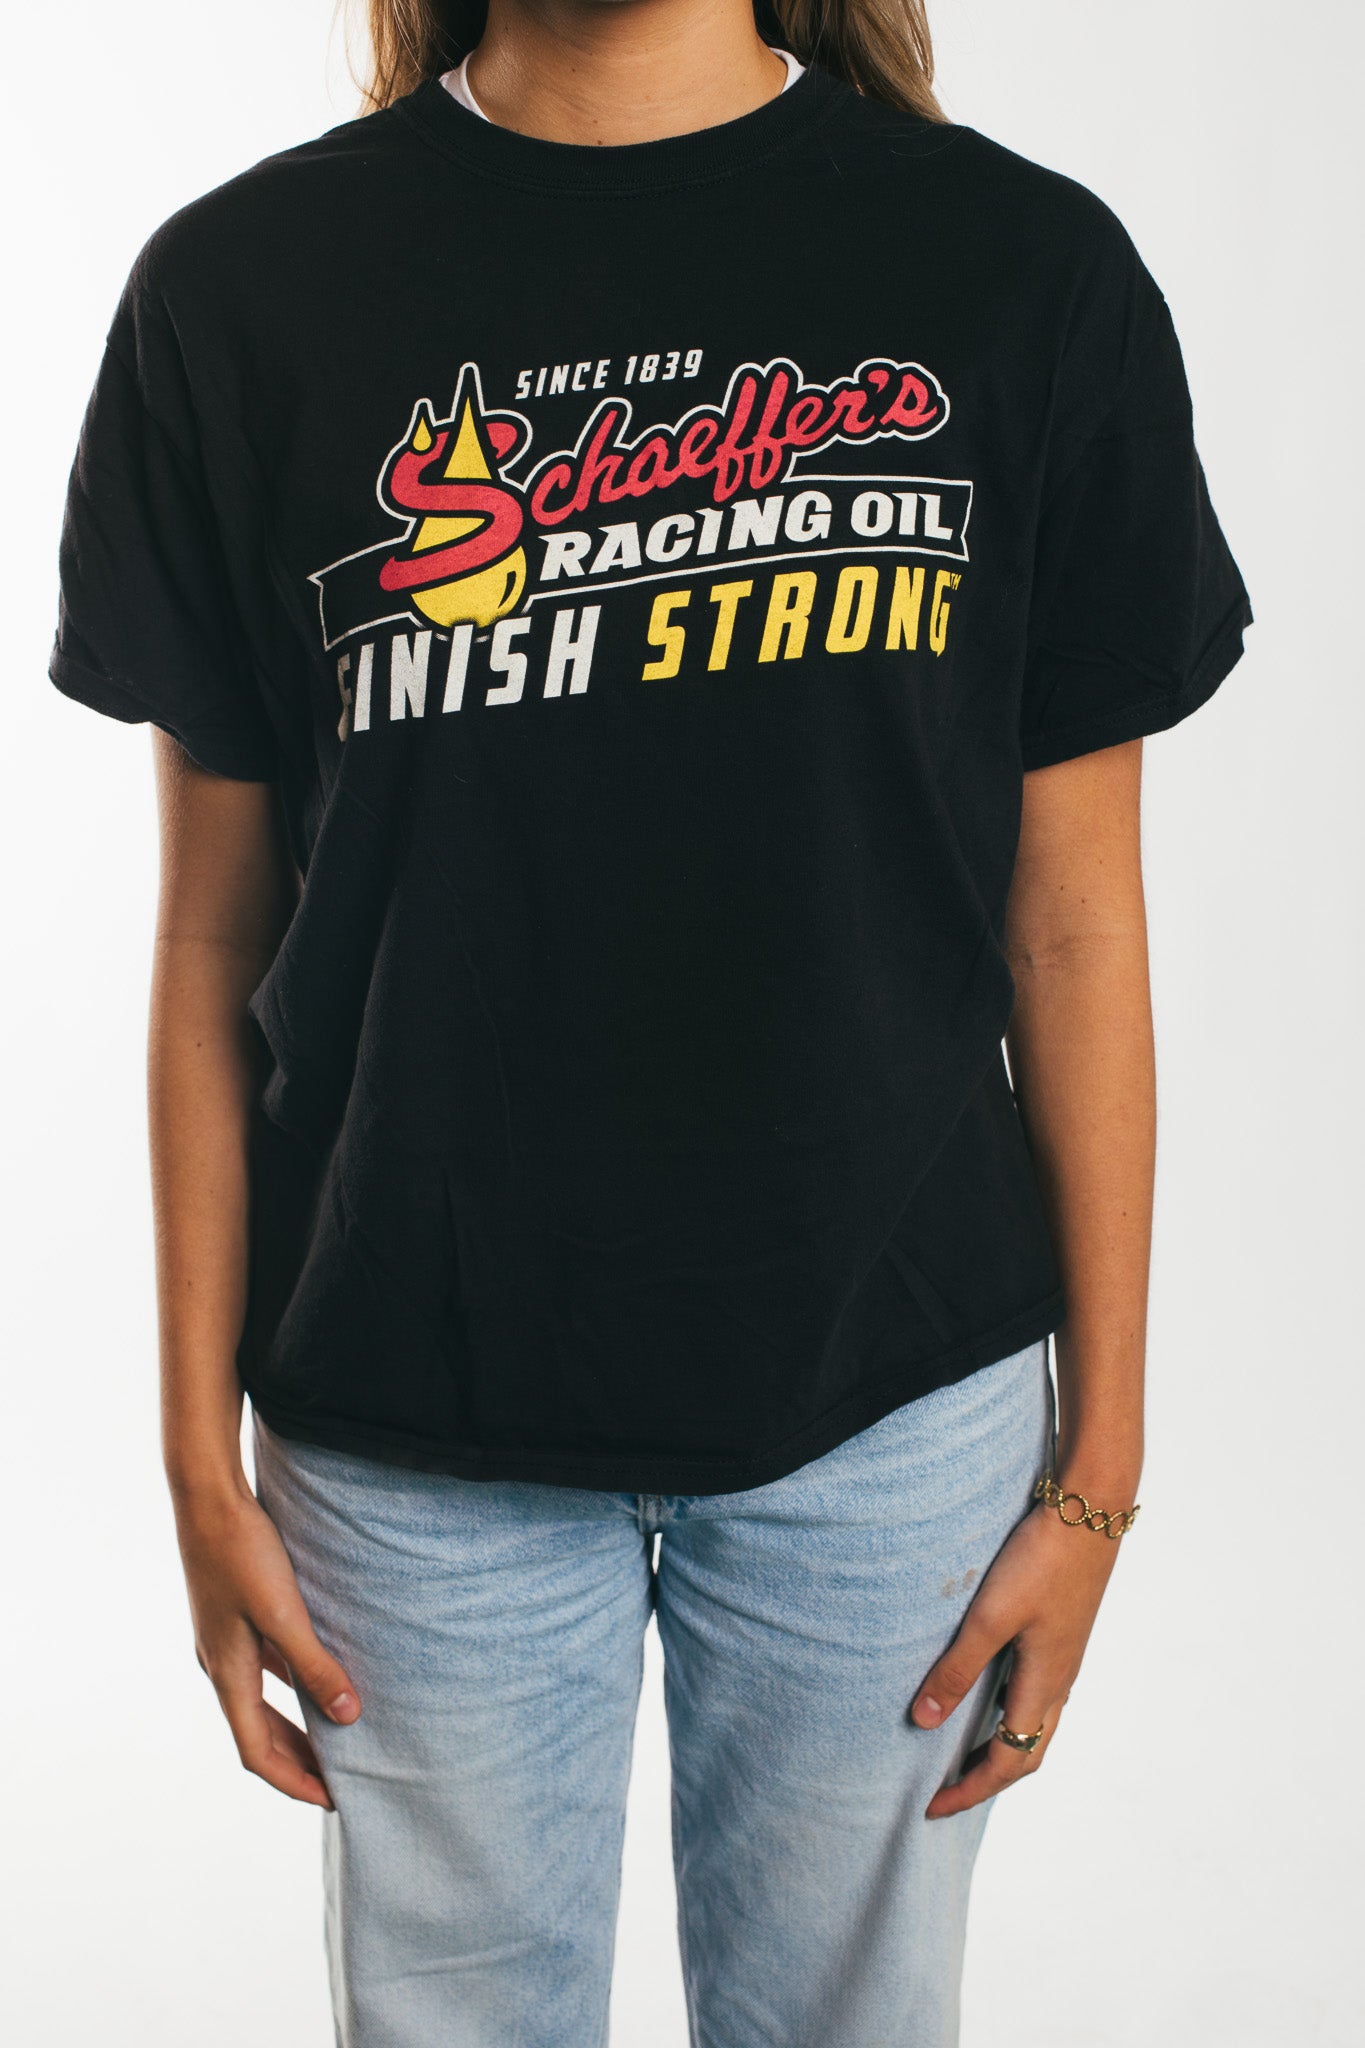 Racing Oil Finish Strong - T-Shirt (M)